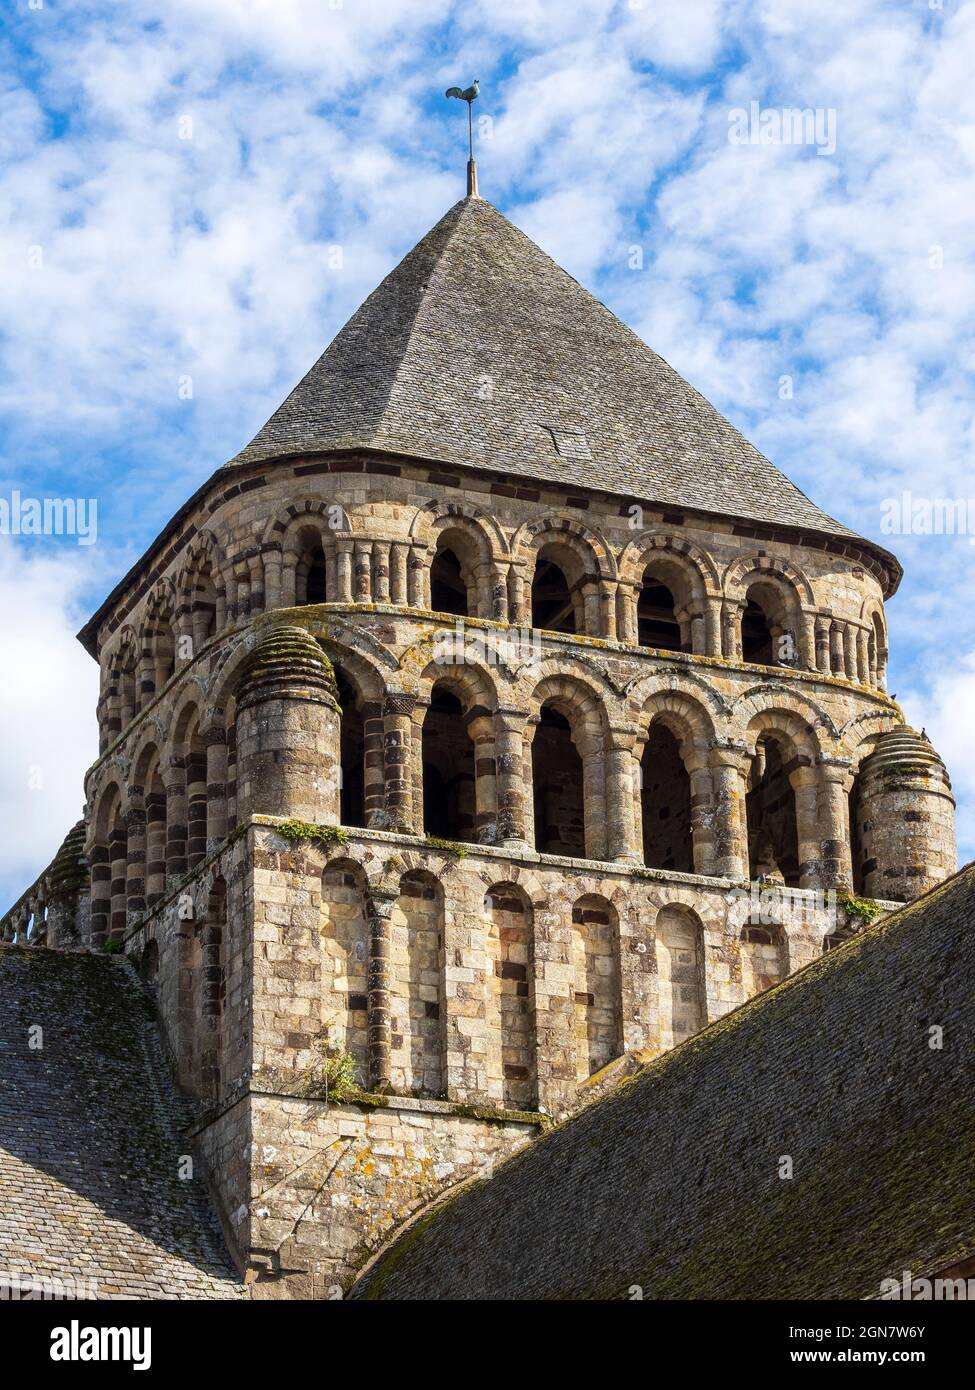 The bell tower on the transept, Saint-Sauveur abbey, Redon (35600), Brittany, France, Stock Photo